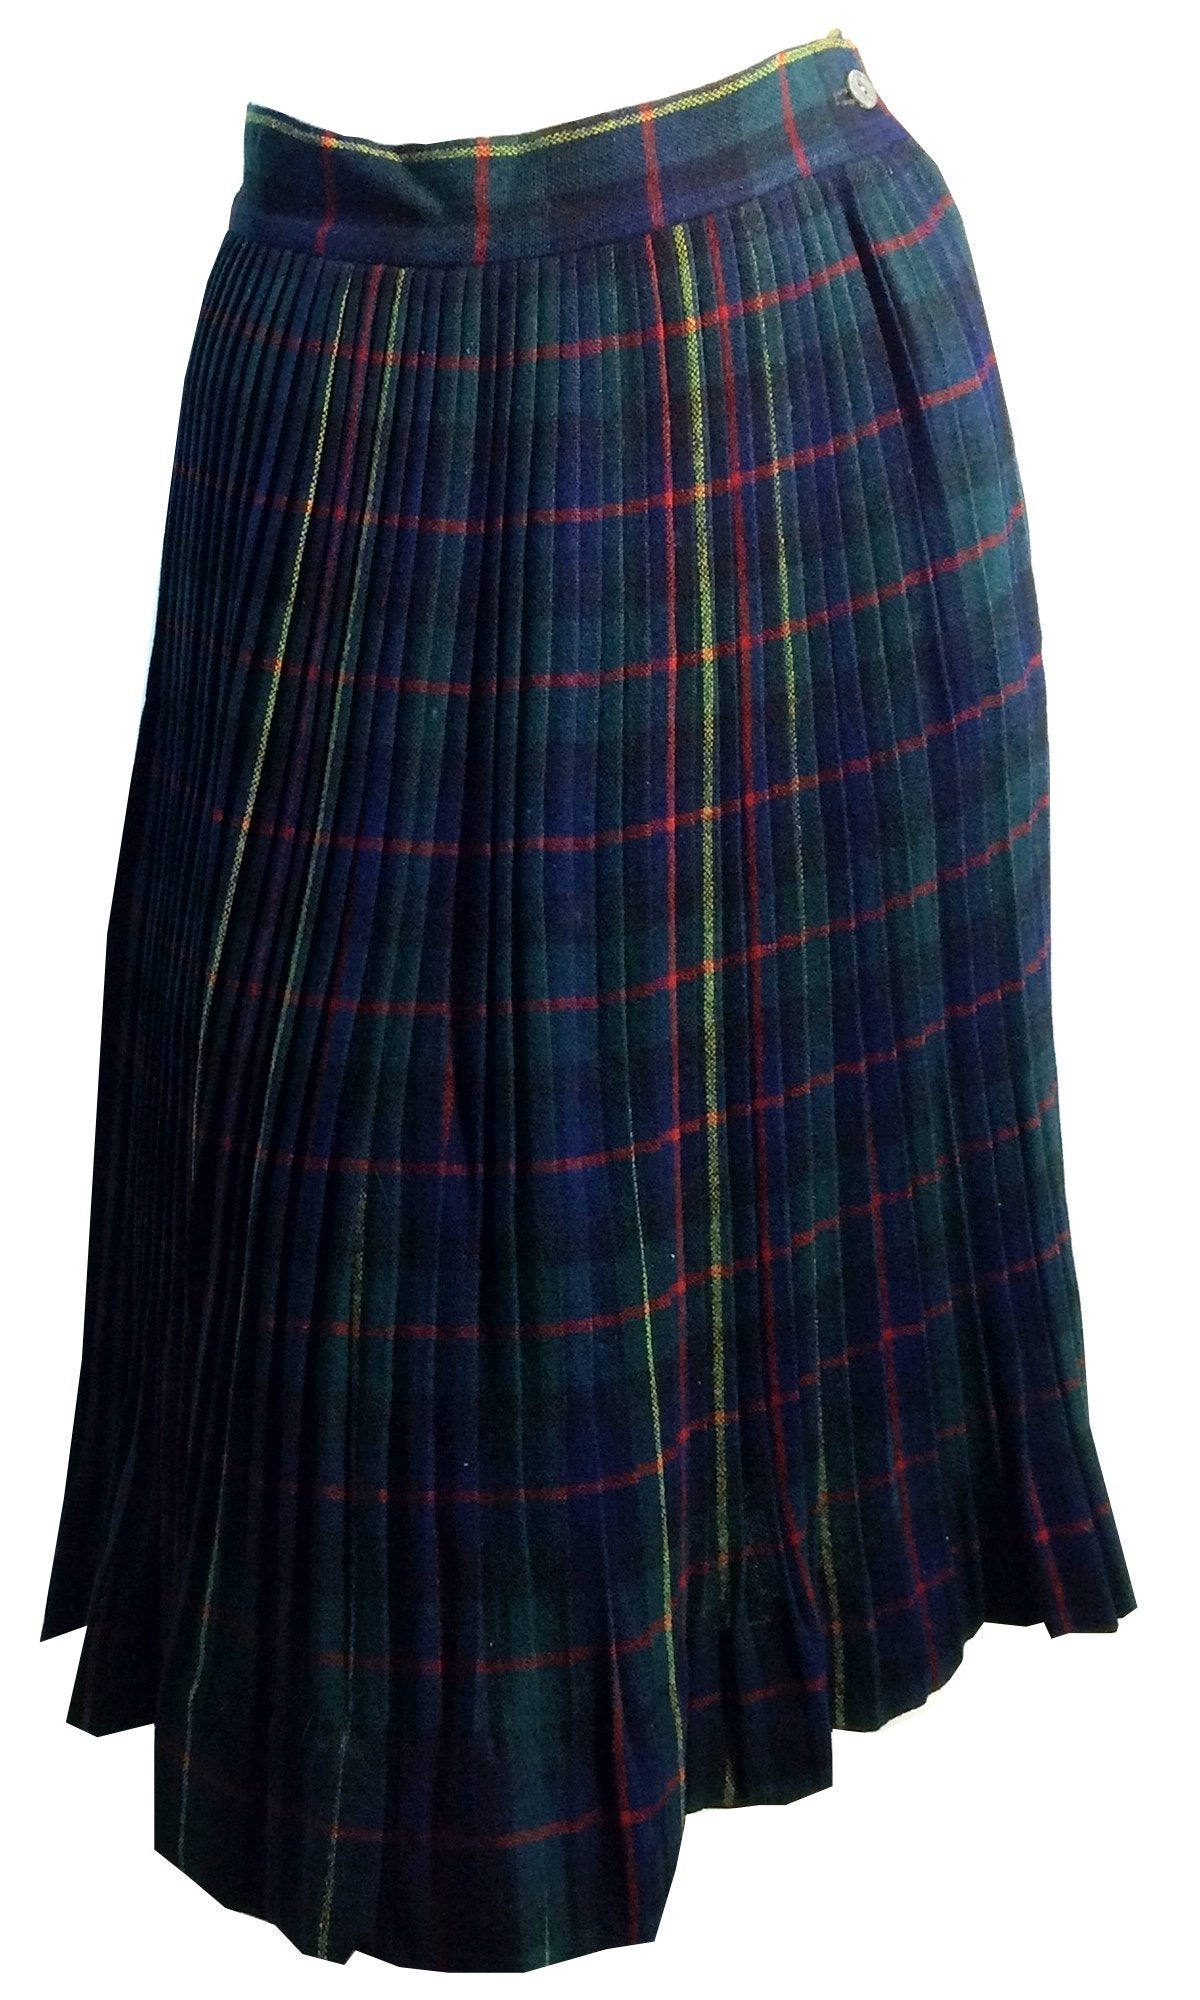 Preppy Blue and Green Plaid Wool Pleated Skirt circa 1940s